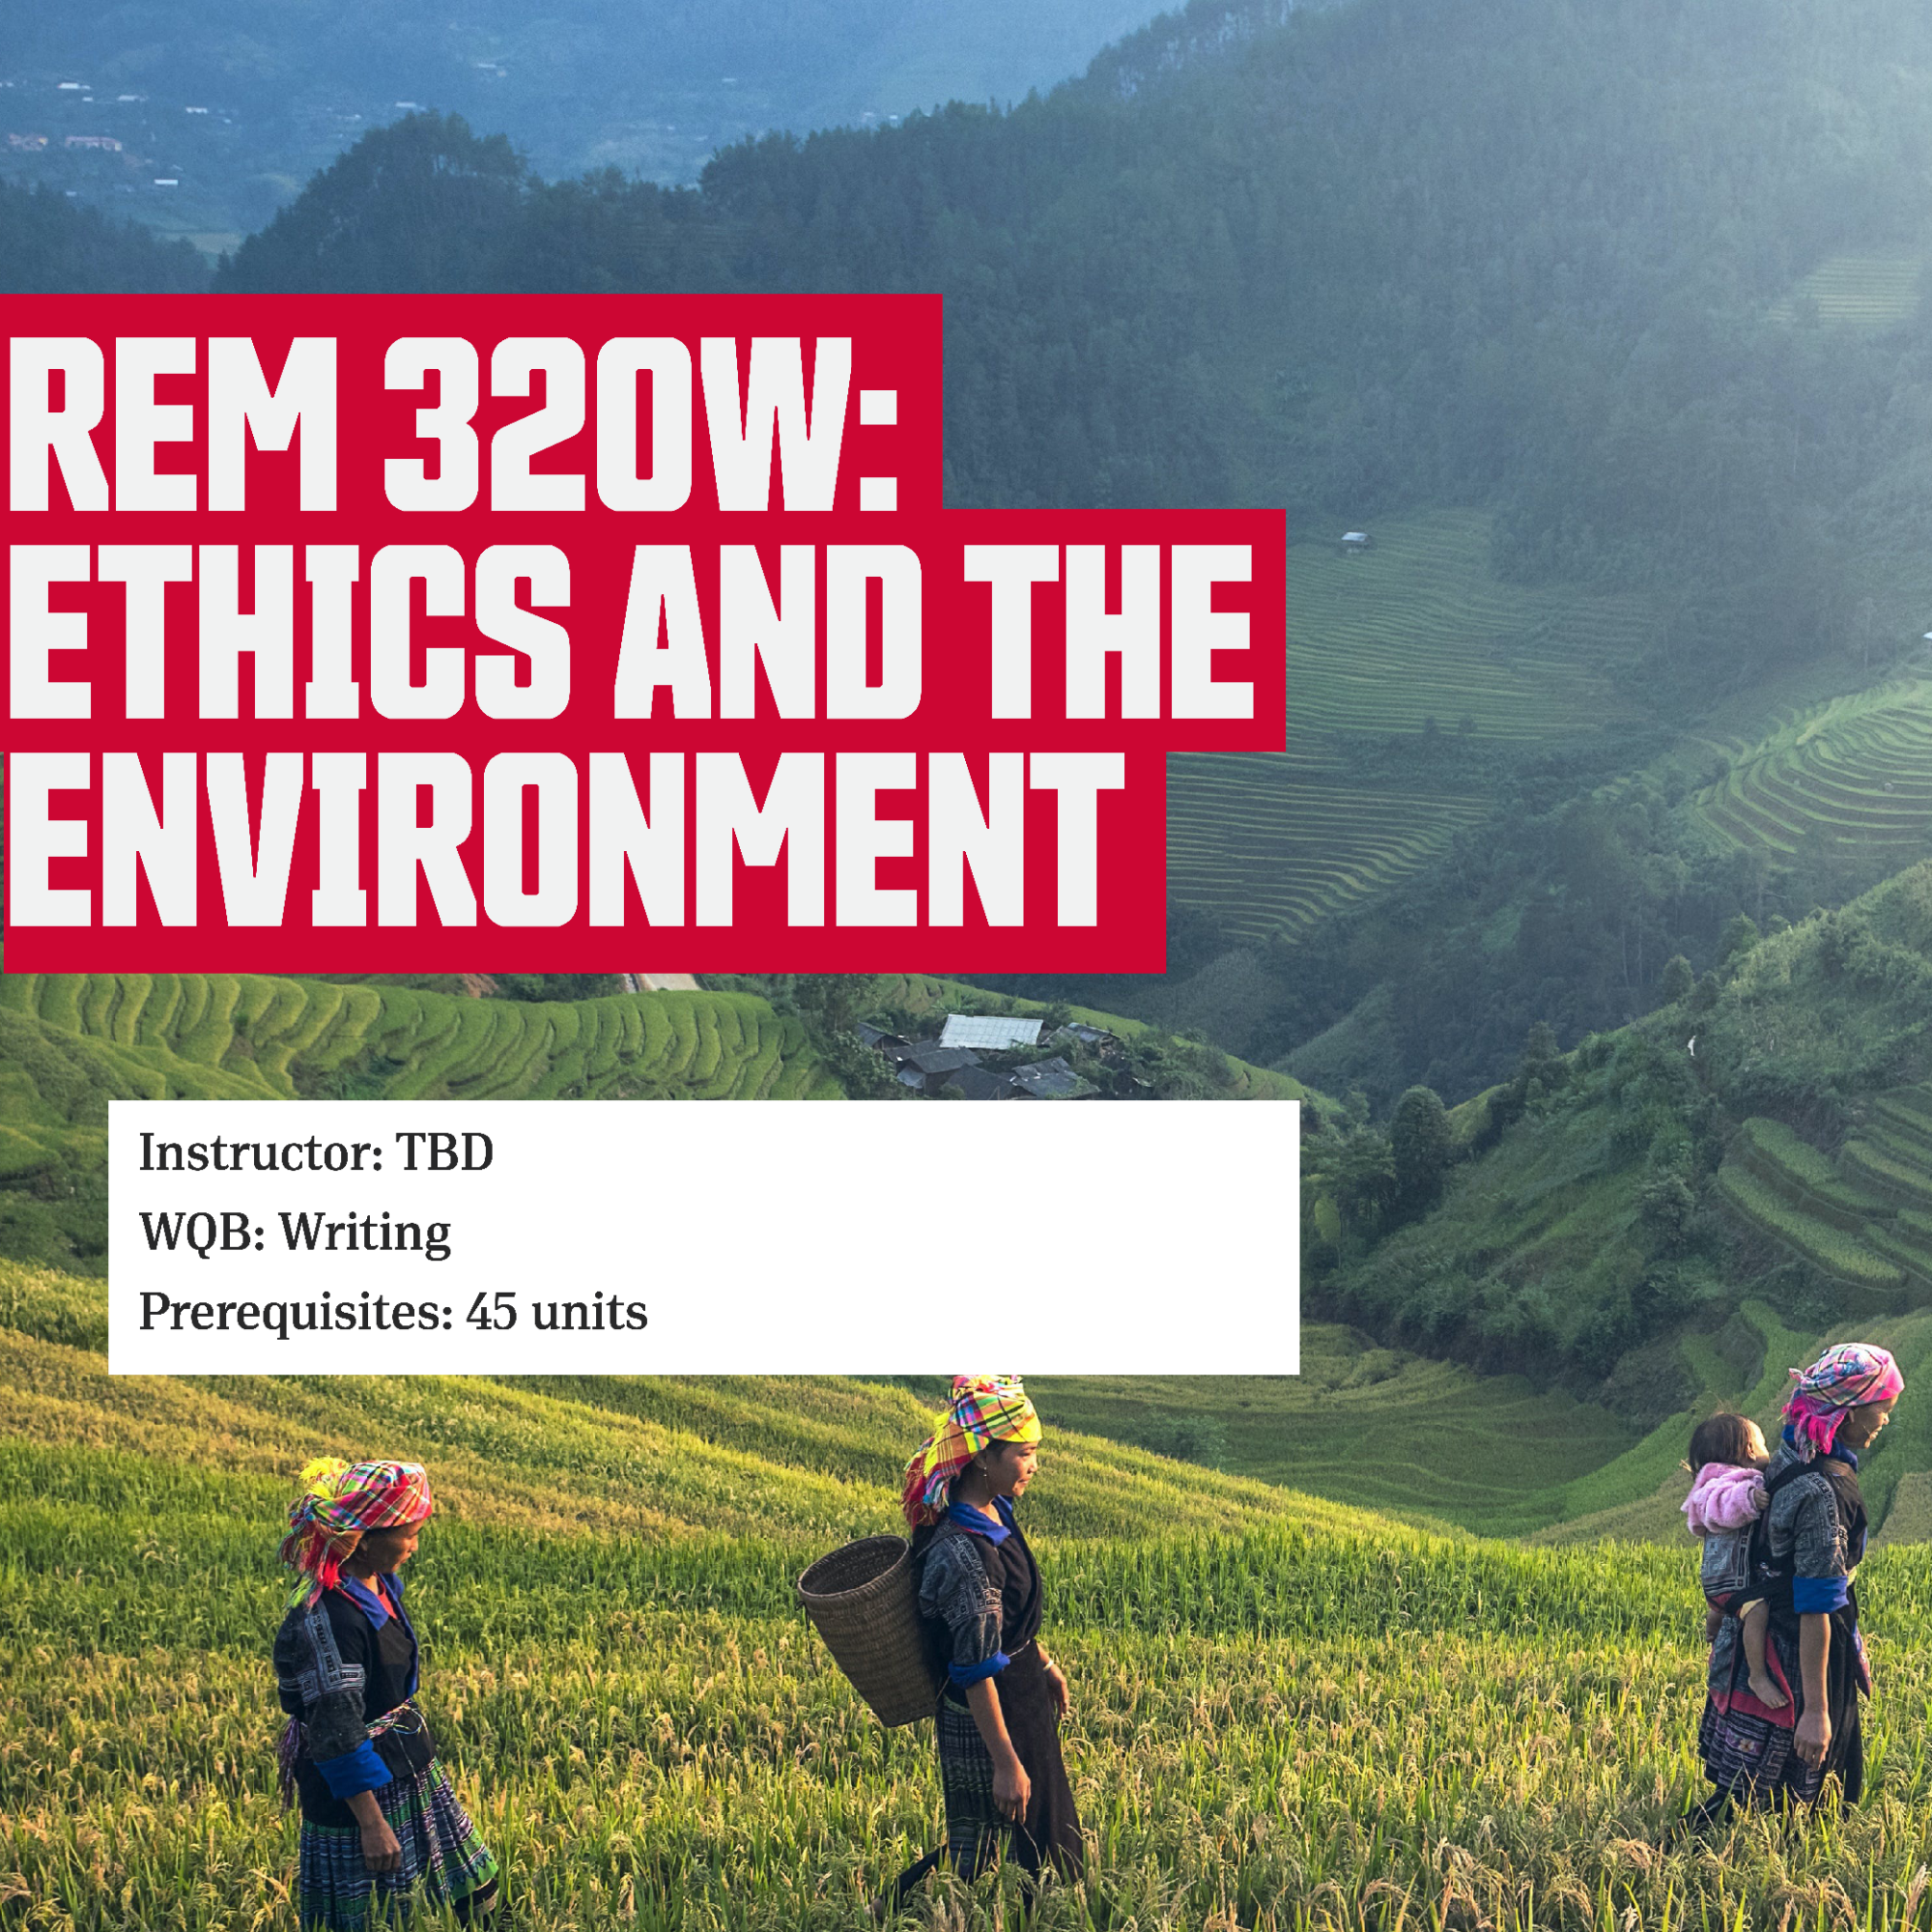 REM 320: Ethics and the environment